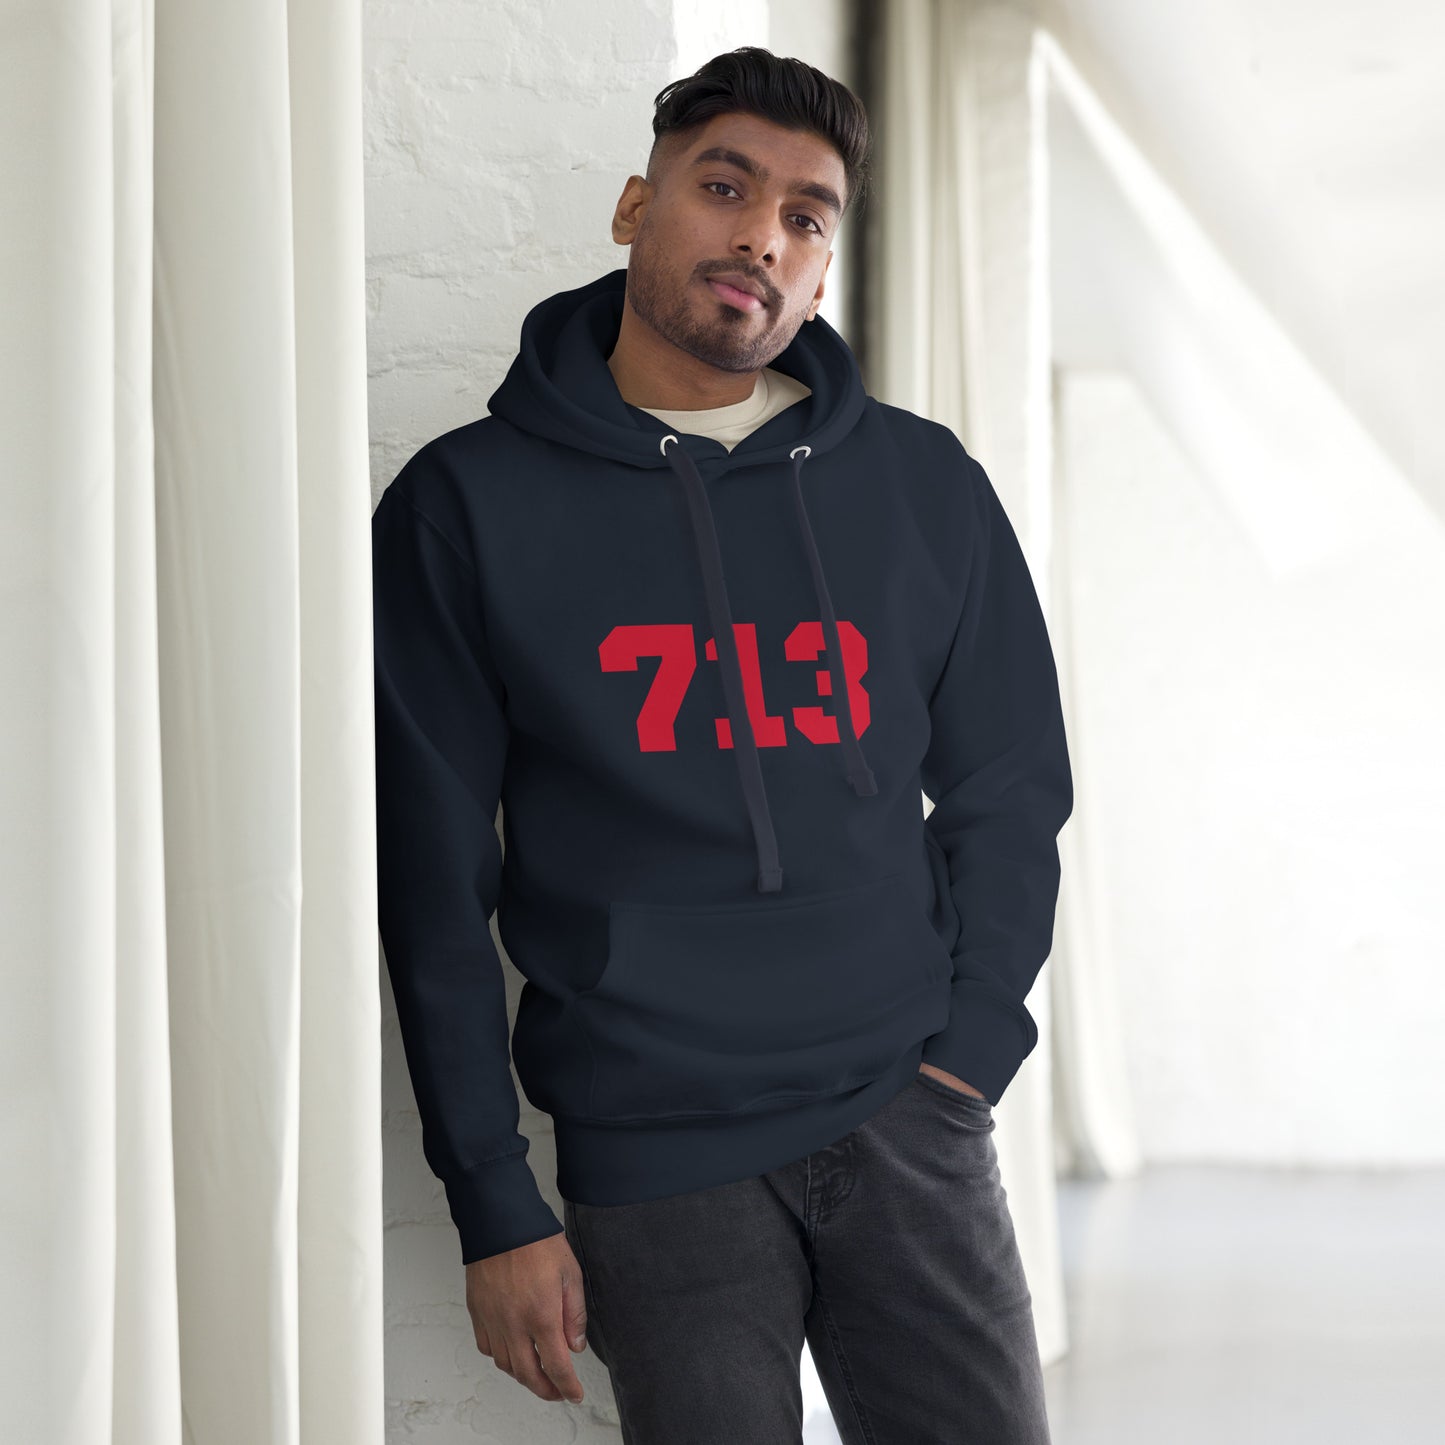 713 Houston Strong Hoodie